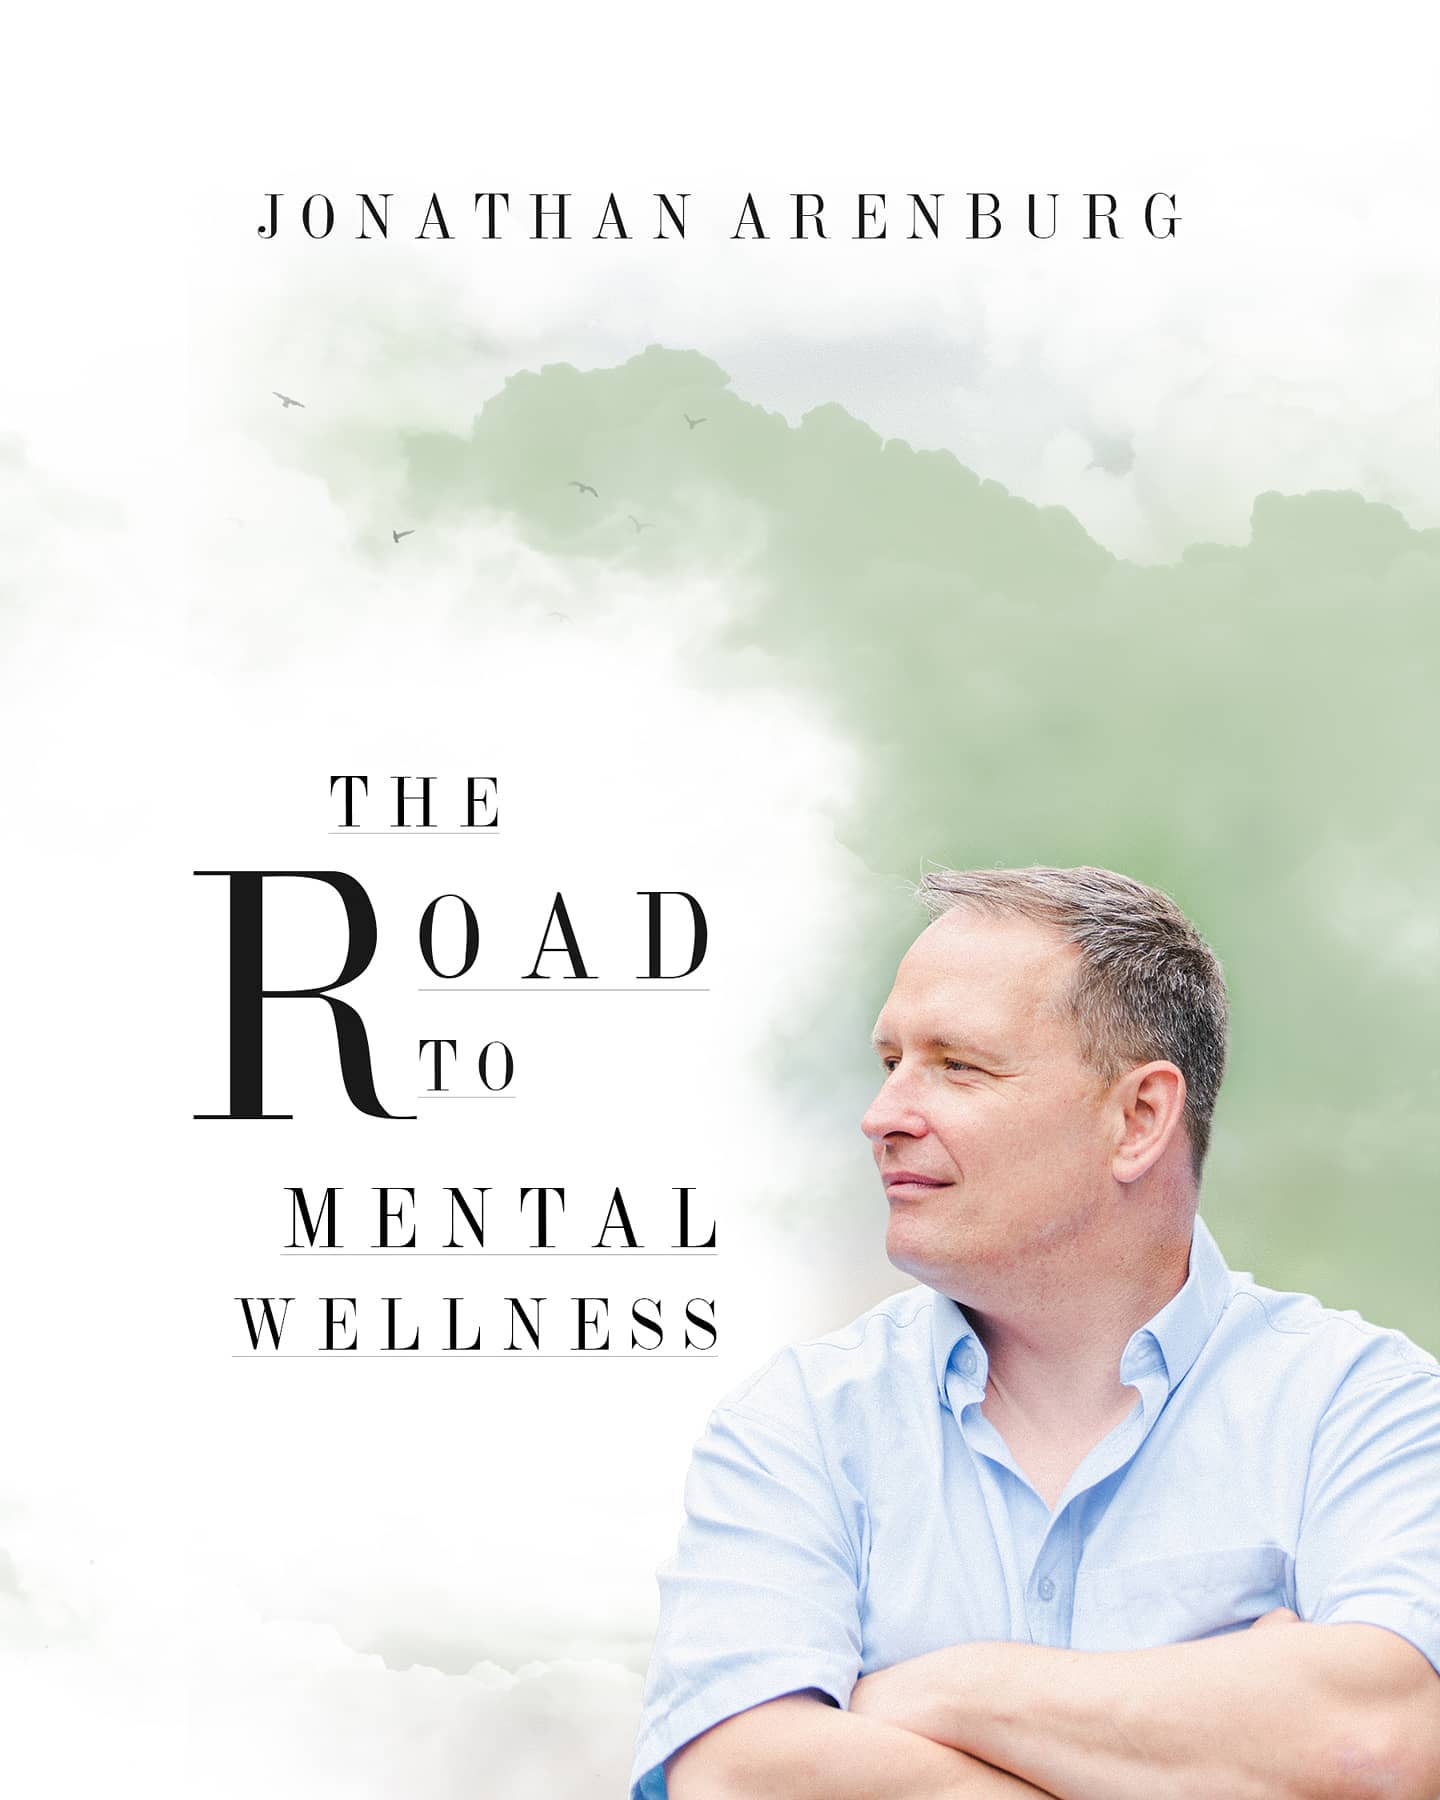 Black coloured font that says The road to mental wellness with Jonathan, the author in the right hand corner